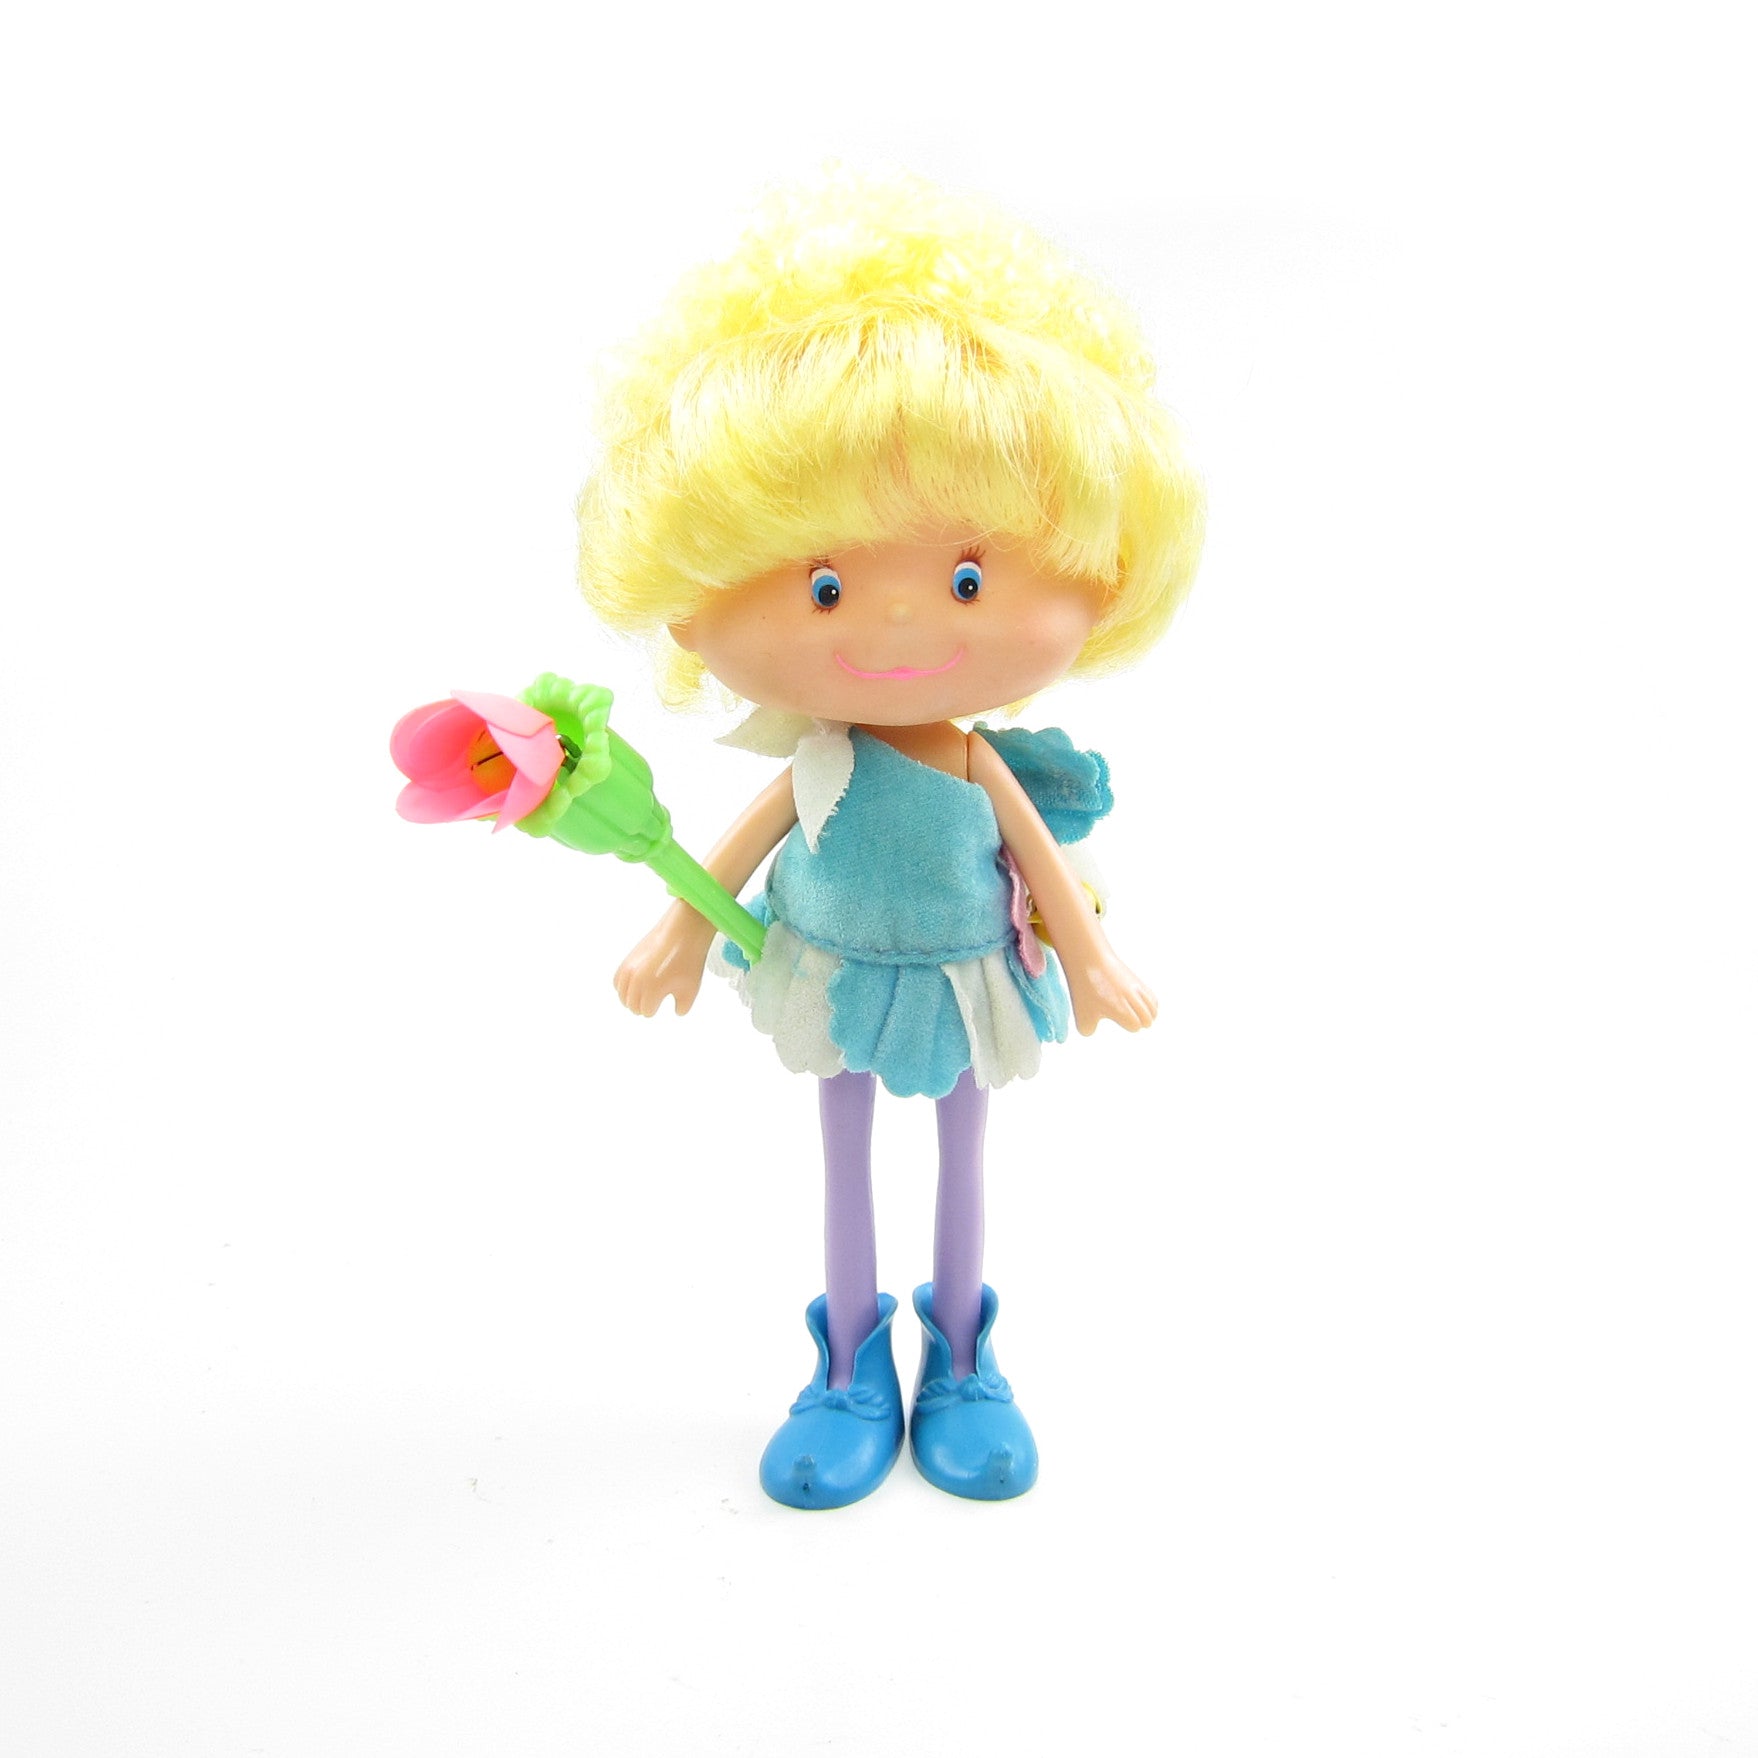 Herself the Elf doll with dress, flower wand, and shoes